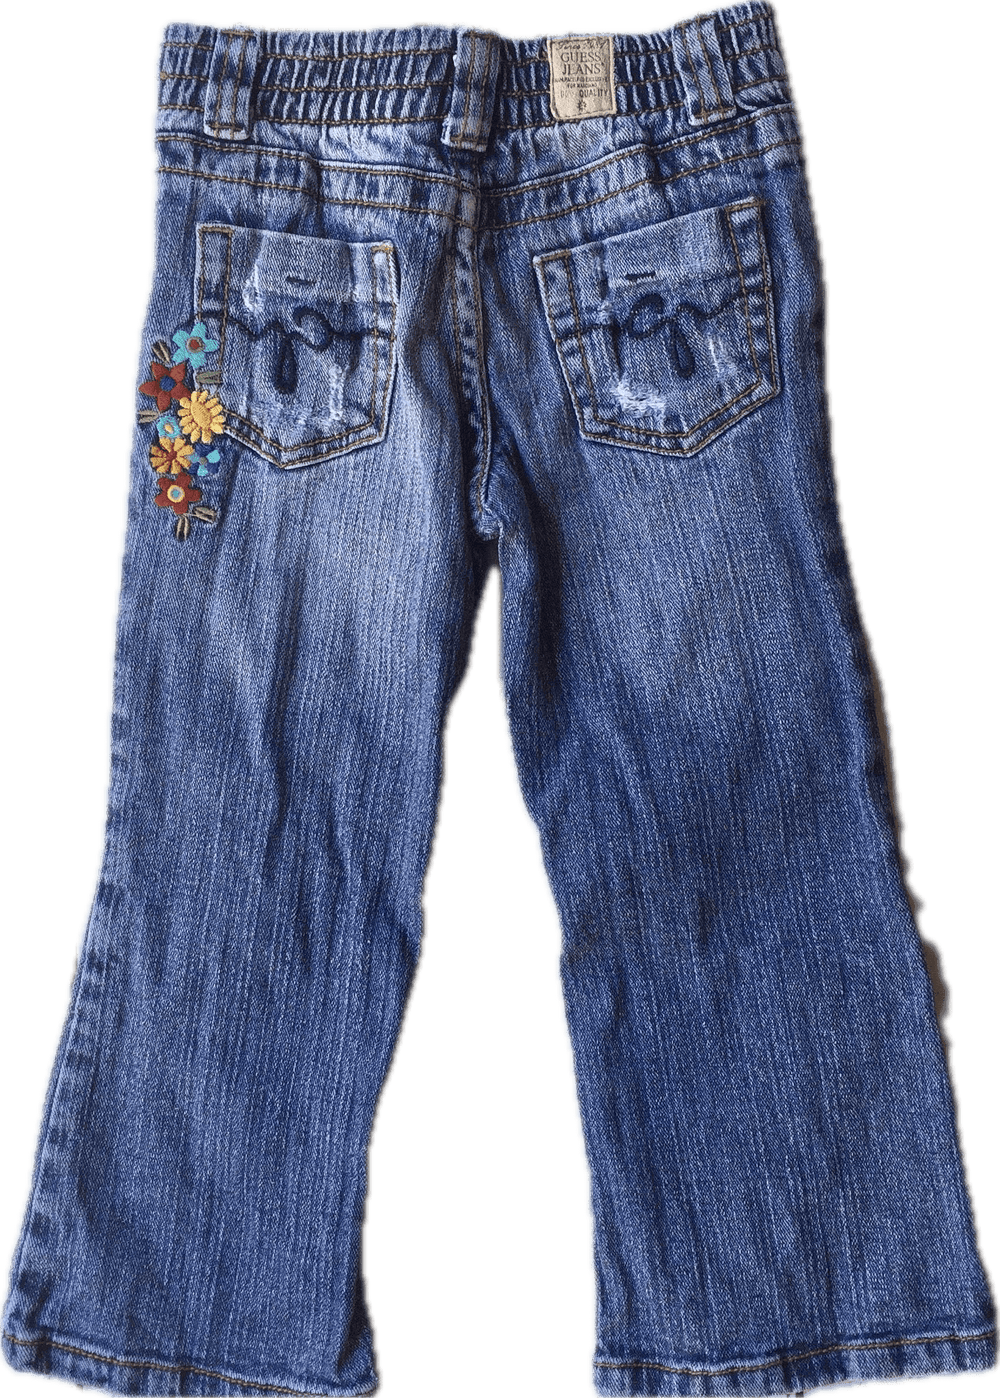 Guess Girls Embroidered Patch Jeans - Size 3 - Jean Pool